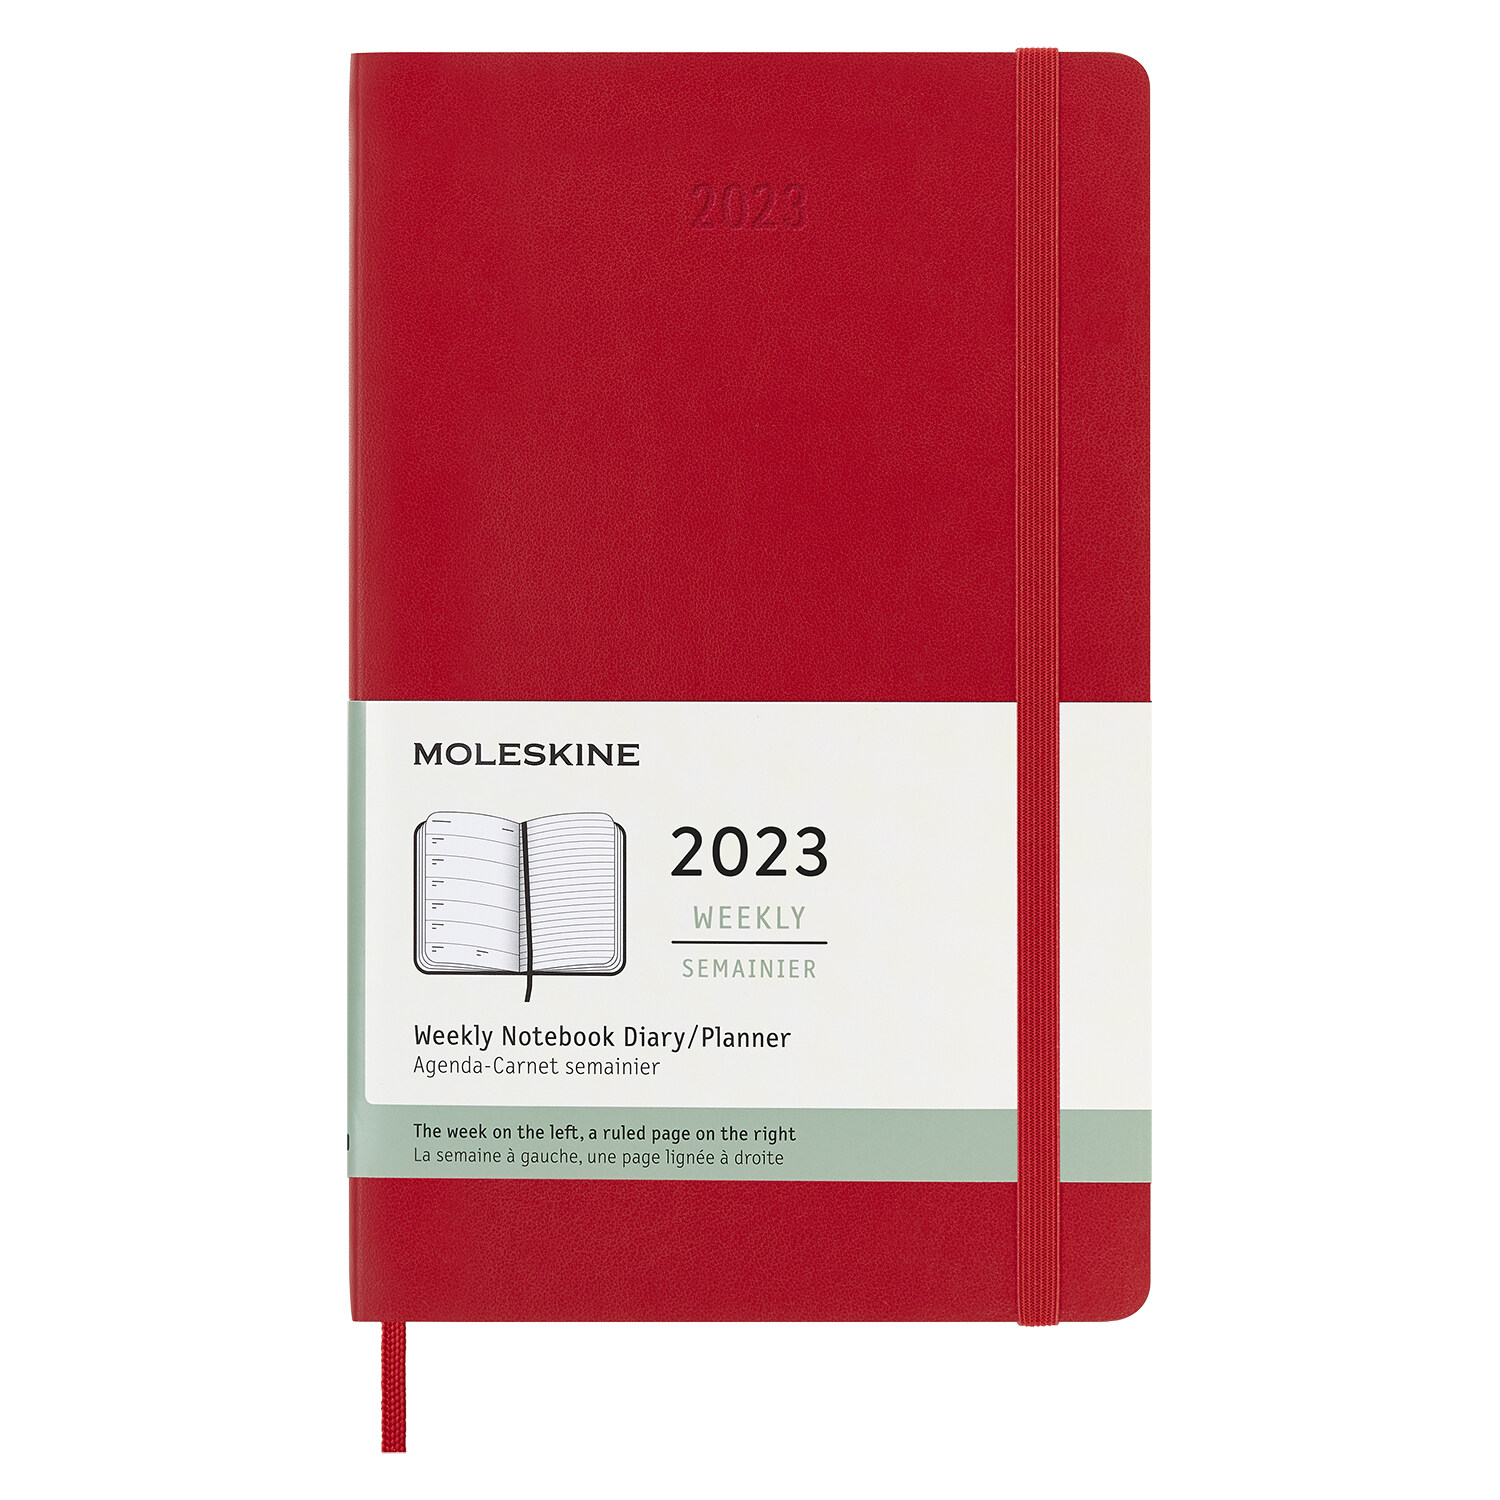 Moleskine 2023 Weekly Notebook Planner, 12m, Large, Scarlet Red, Soft Cover (5 X 8.25) (Other)